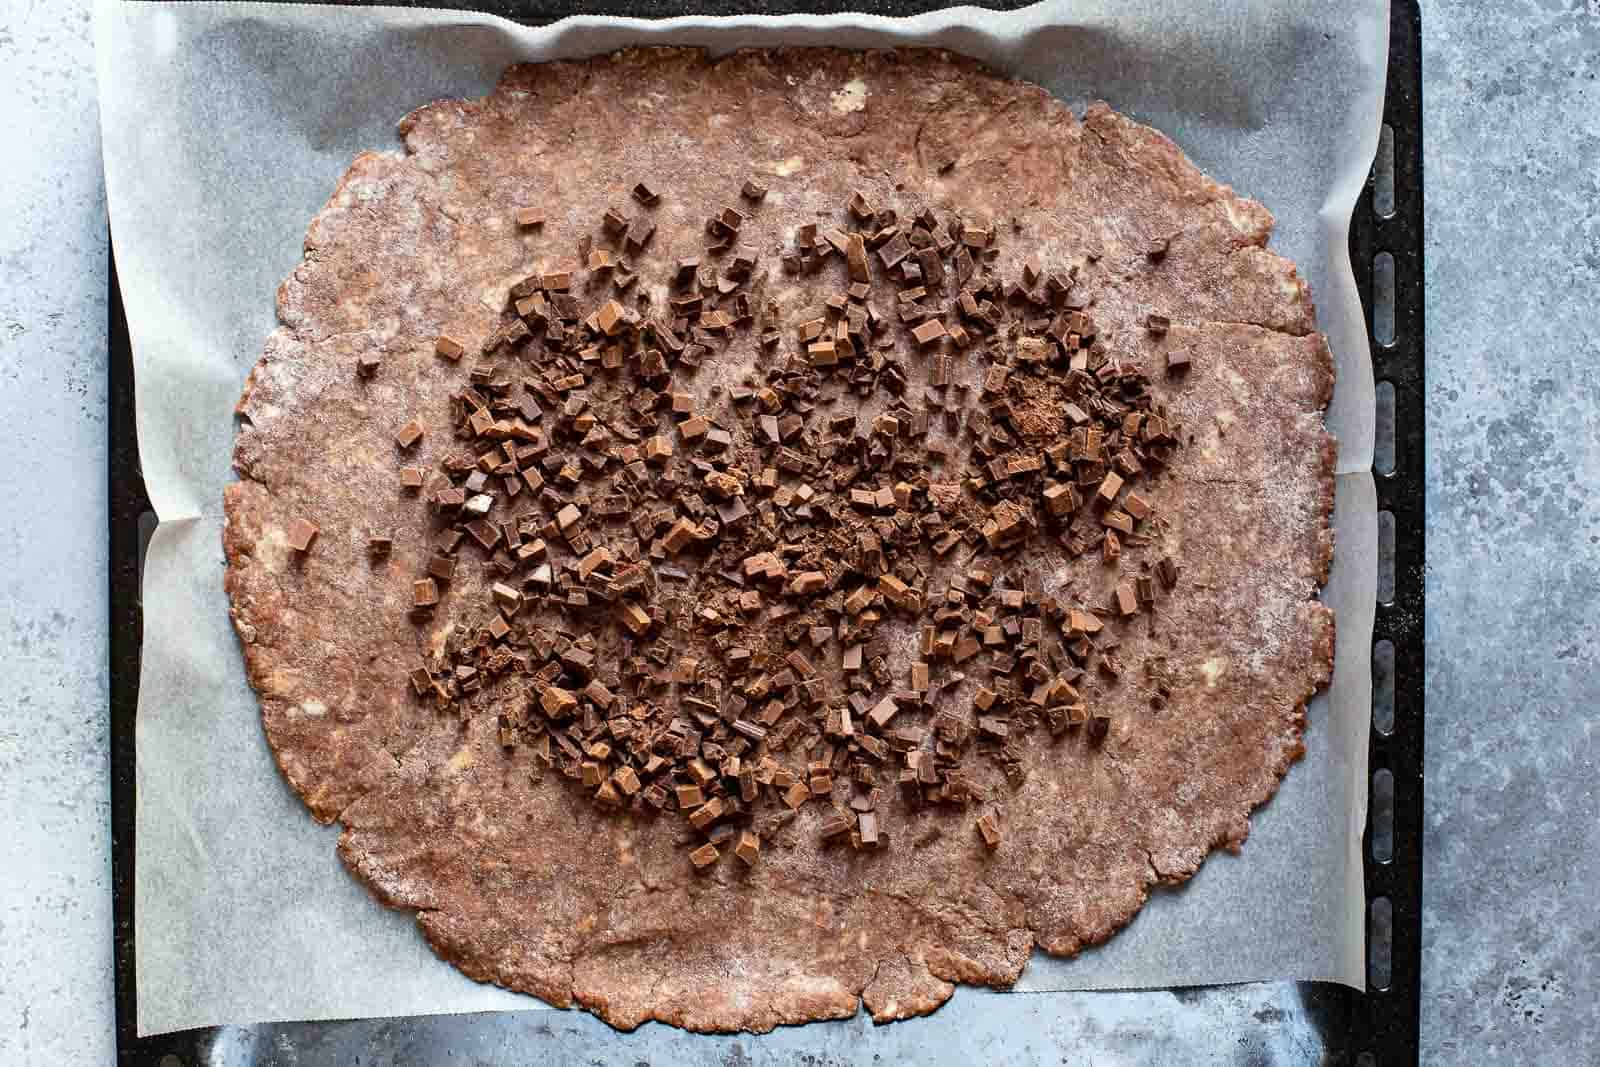 galette process image of crust